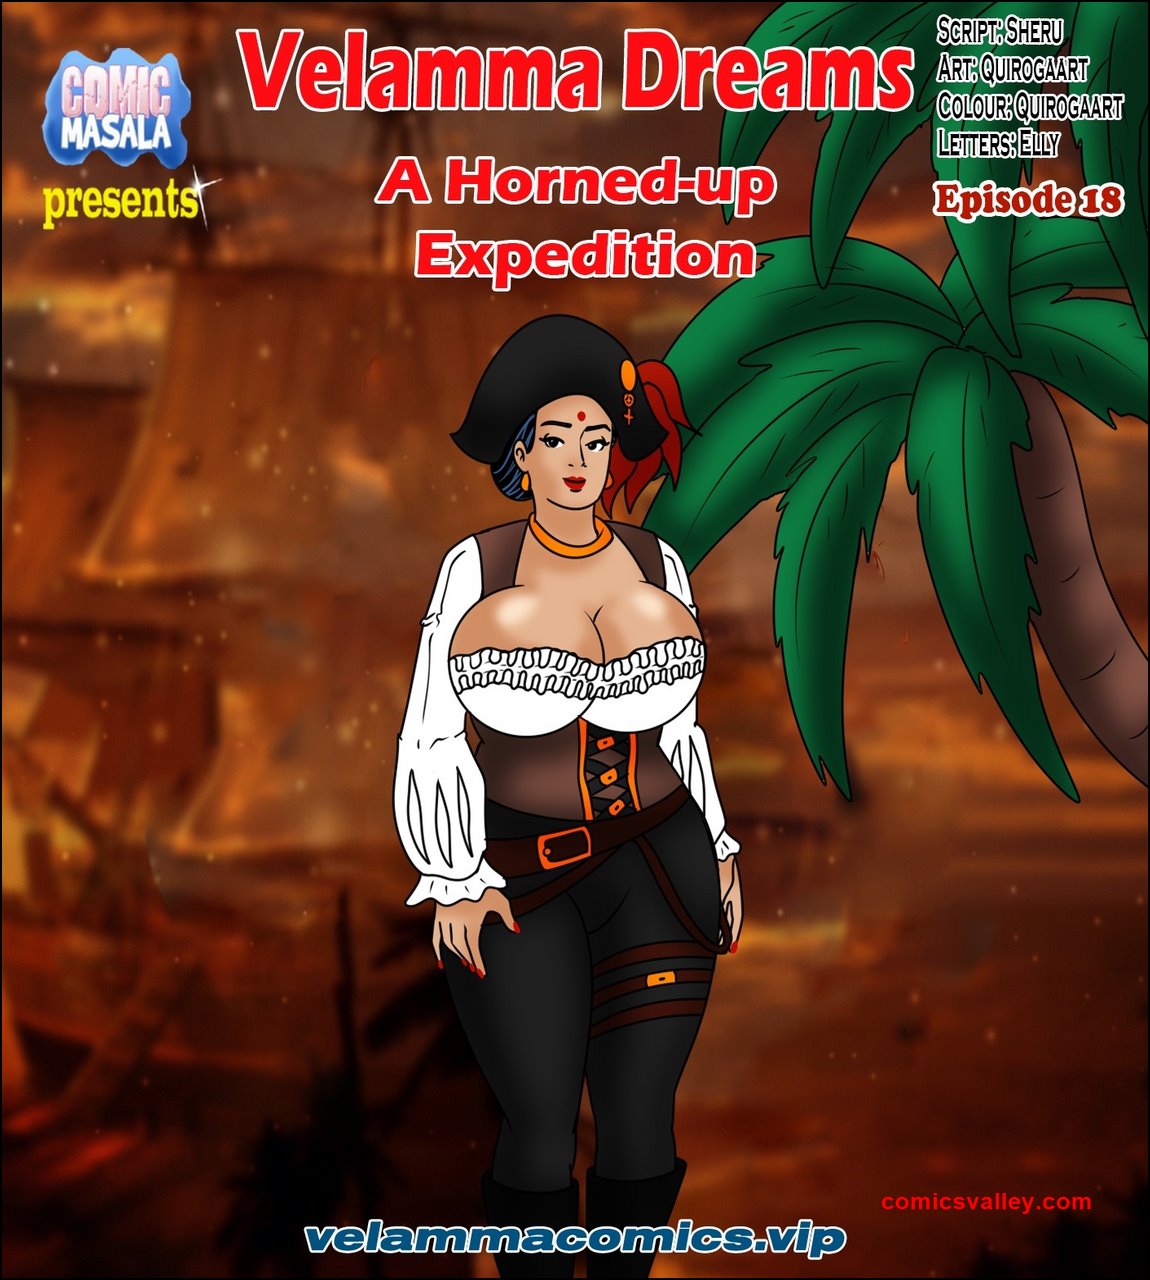 Velamma Dreams Episode 18 - A Horned-up Expedition